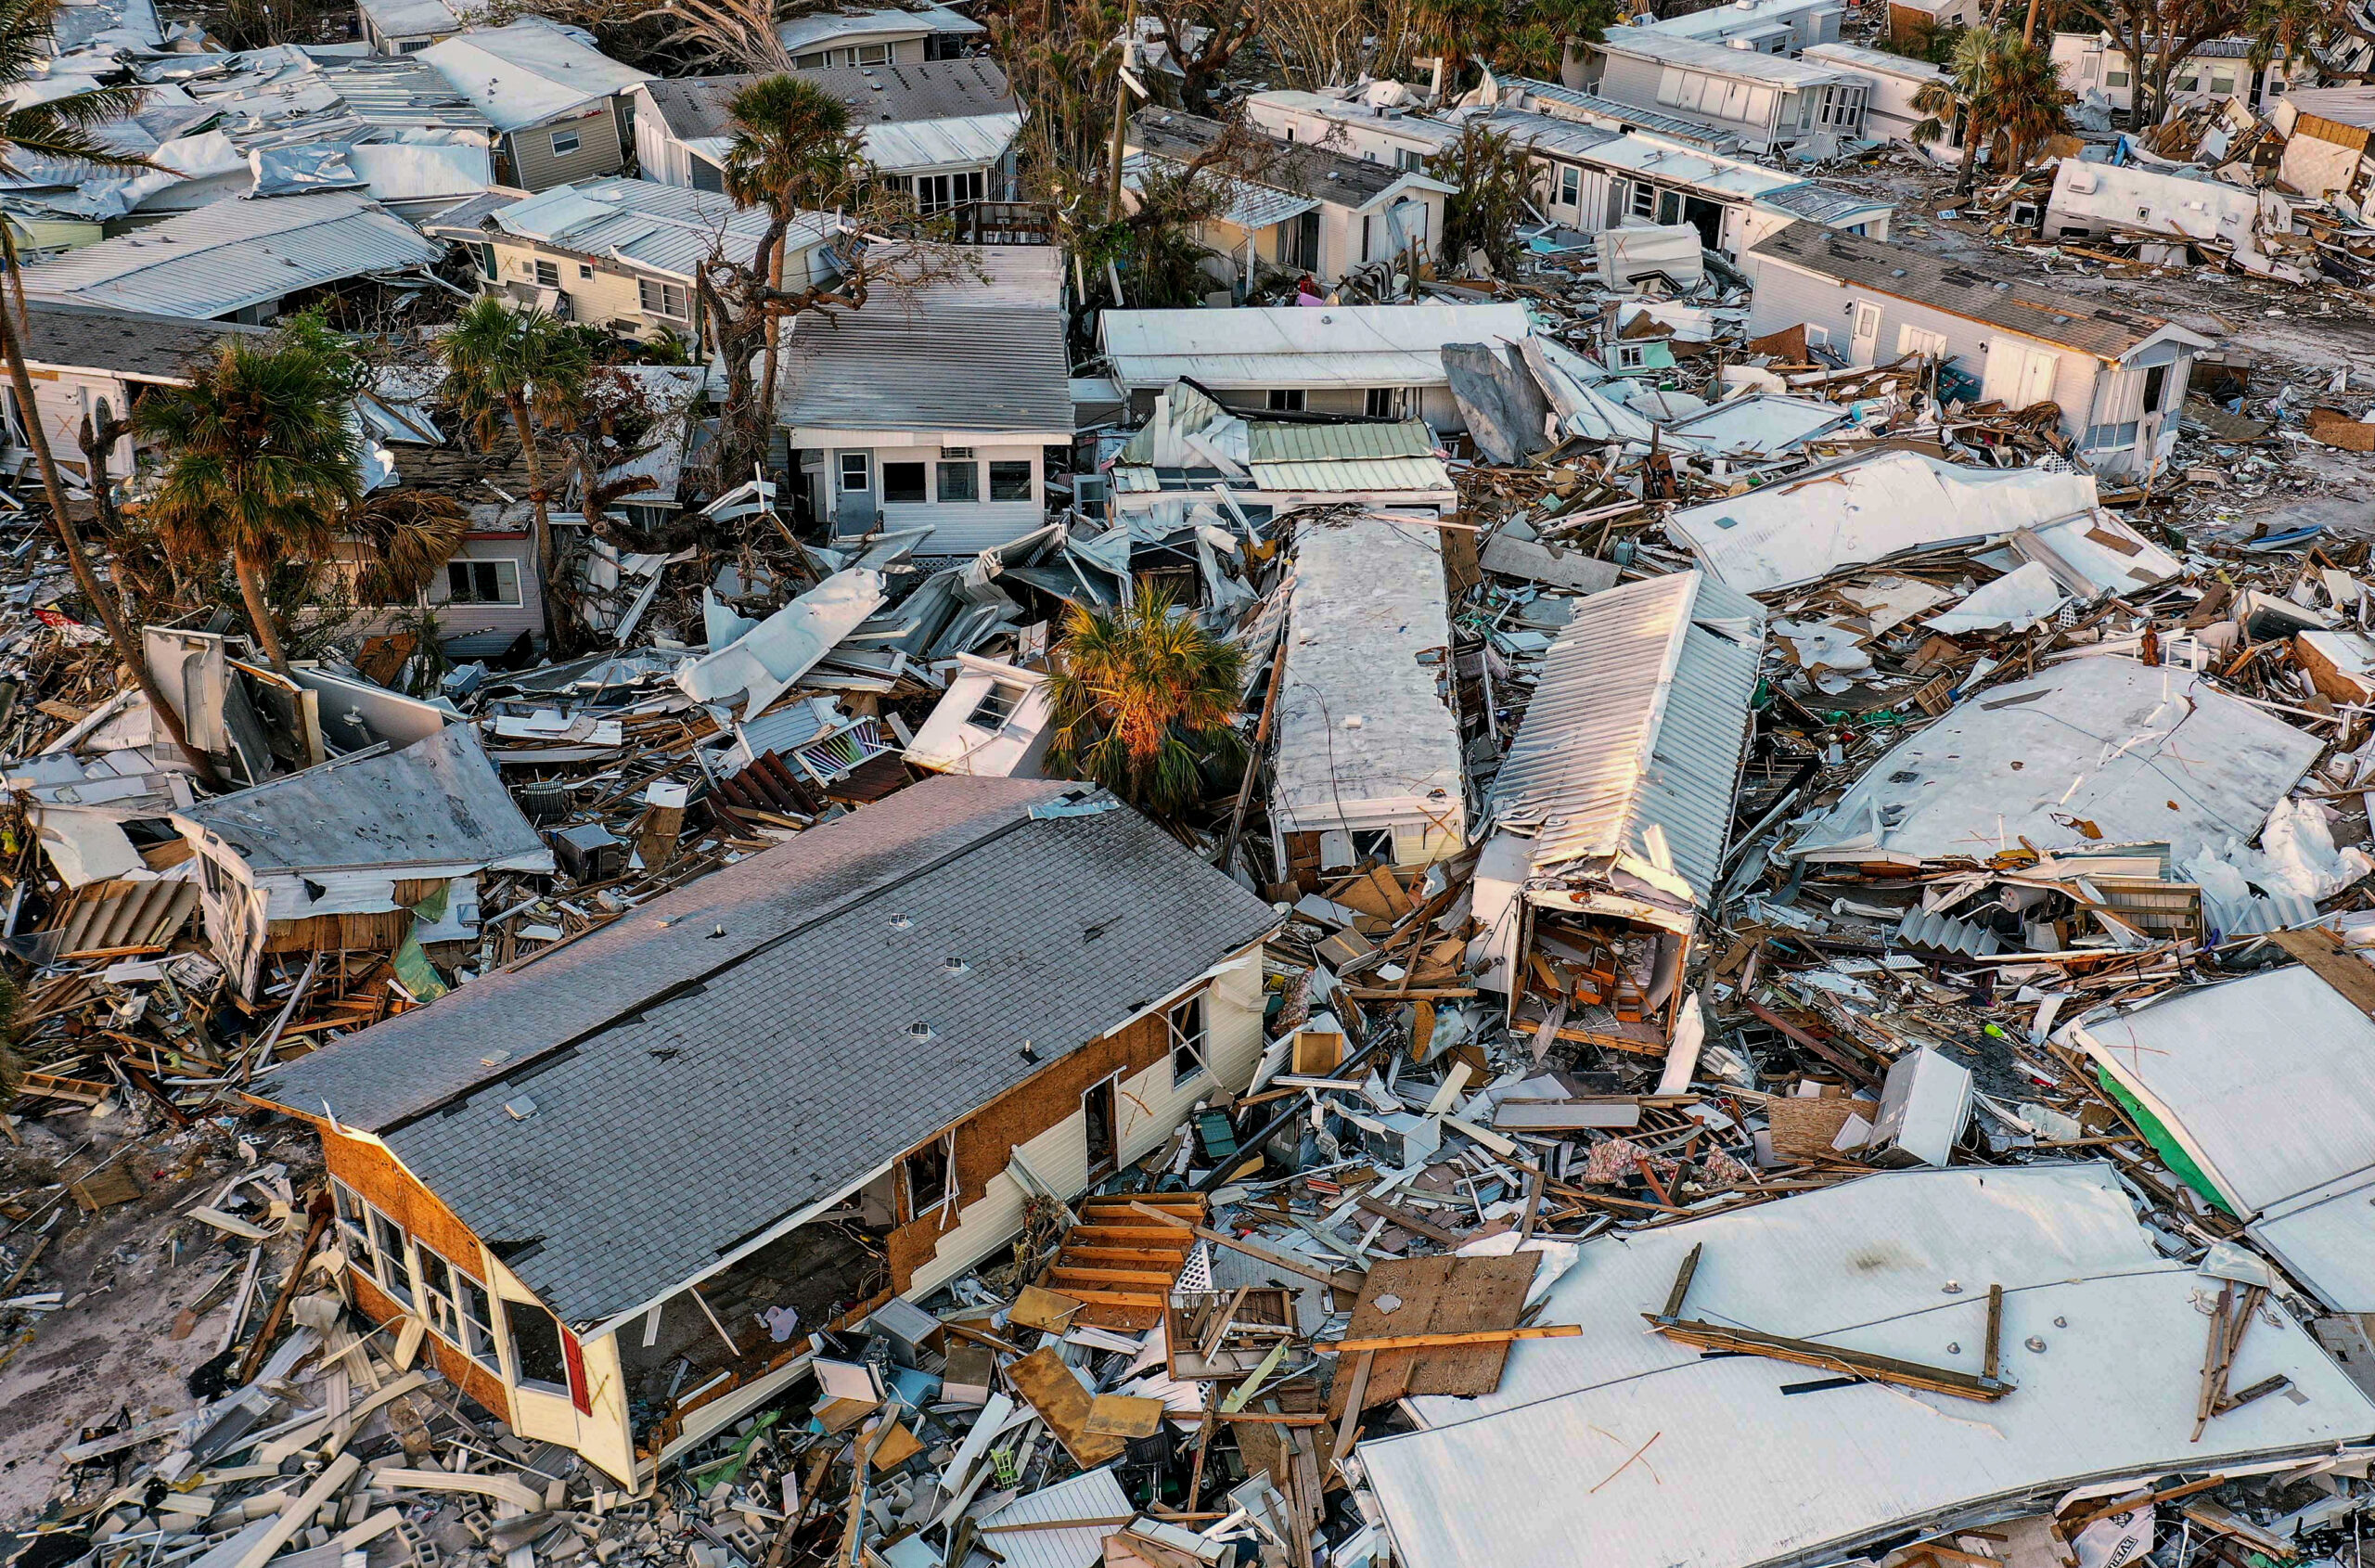 Hurricane Ian shows how older populations are especially vulnerable during disasters